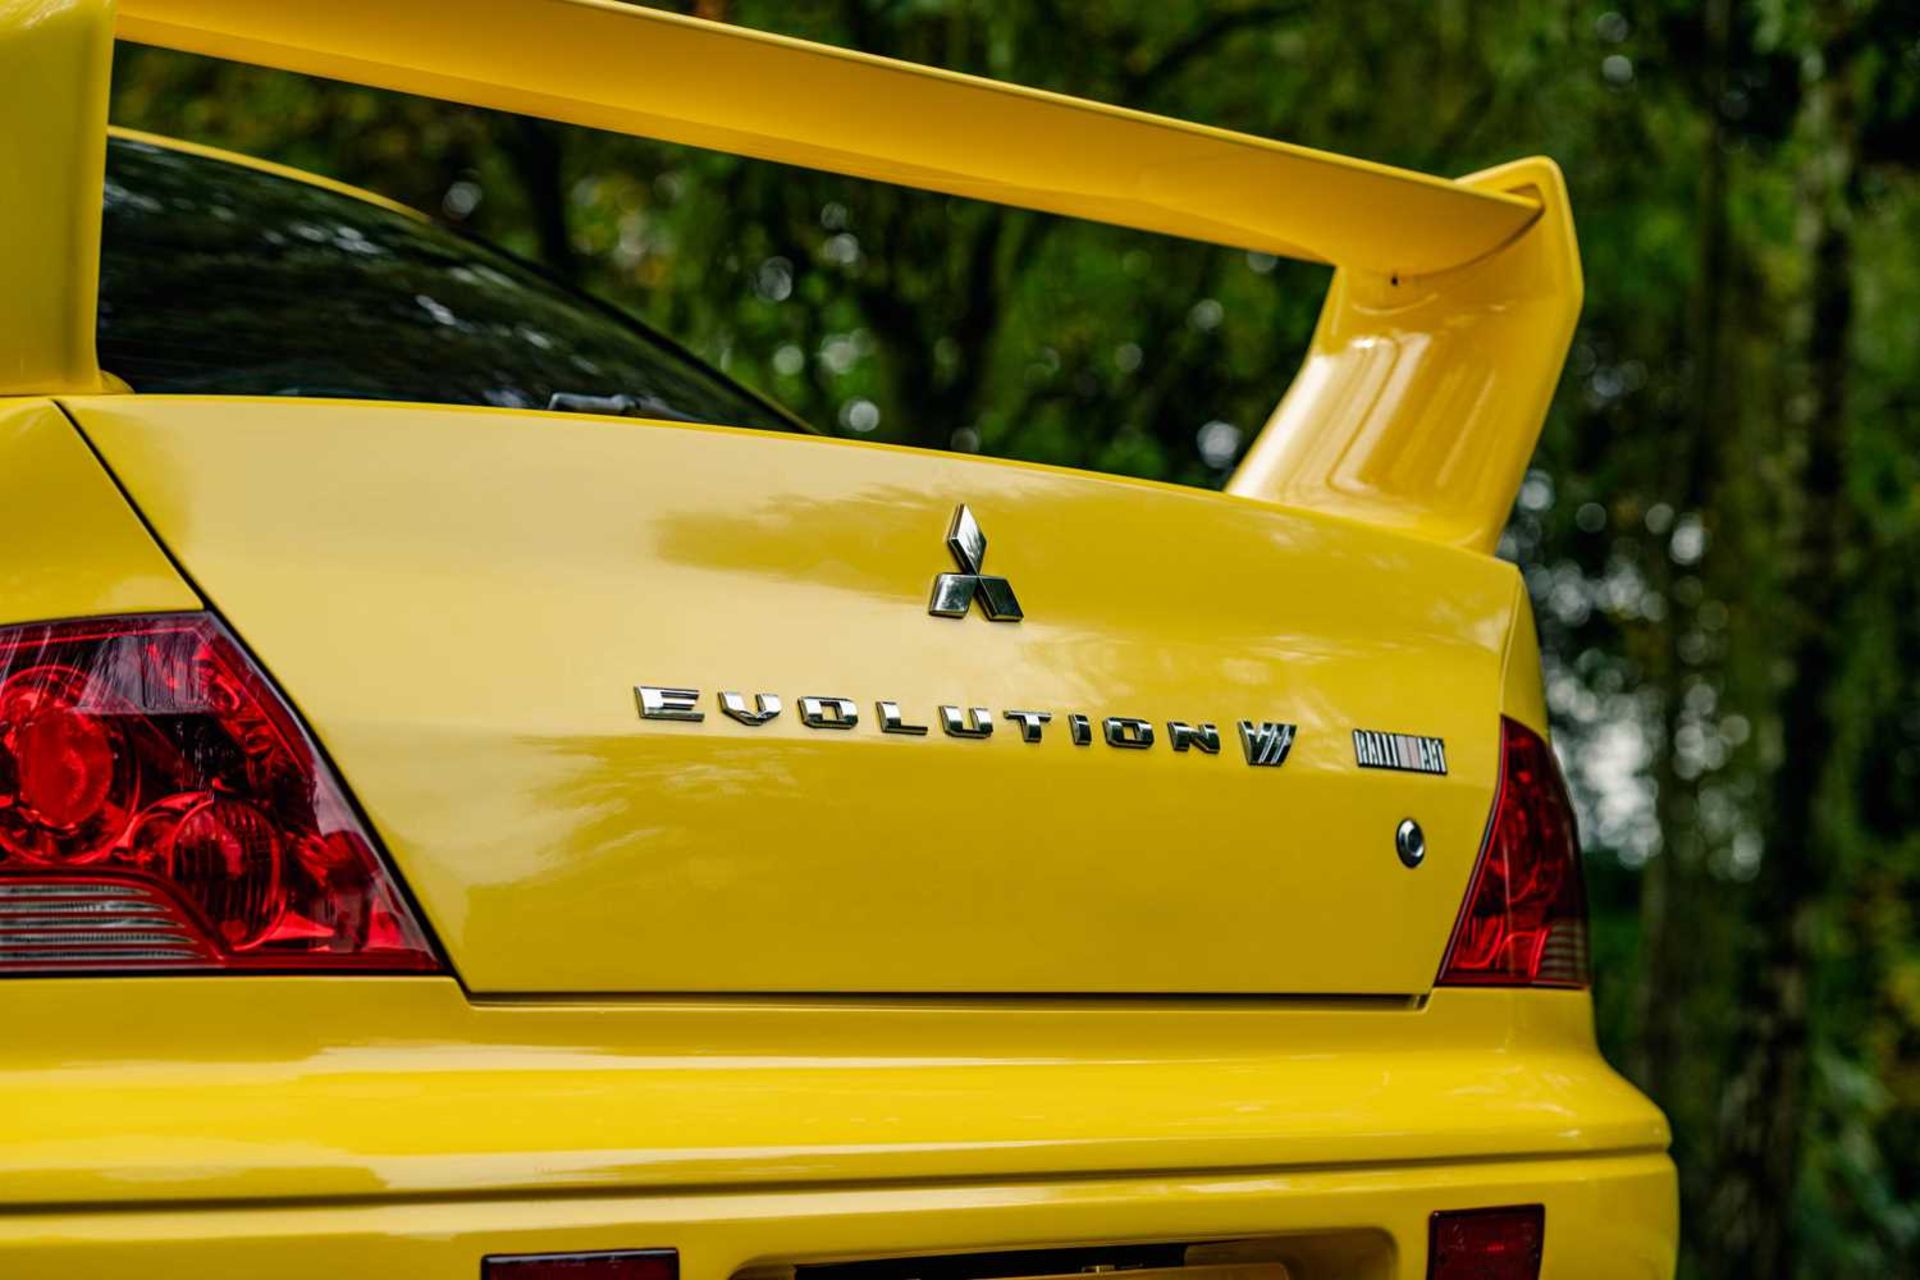 2001 Mitsubishi Lancer Evolution VII Subtly upgraded and previous long-term (seventeen year) ownersh - Image 26 of 64